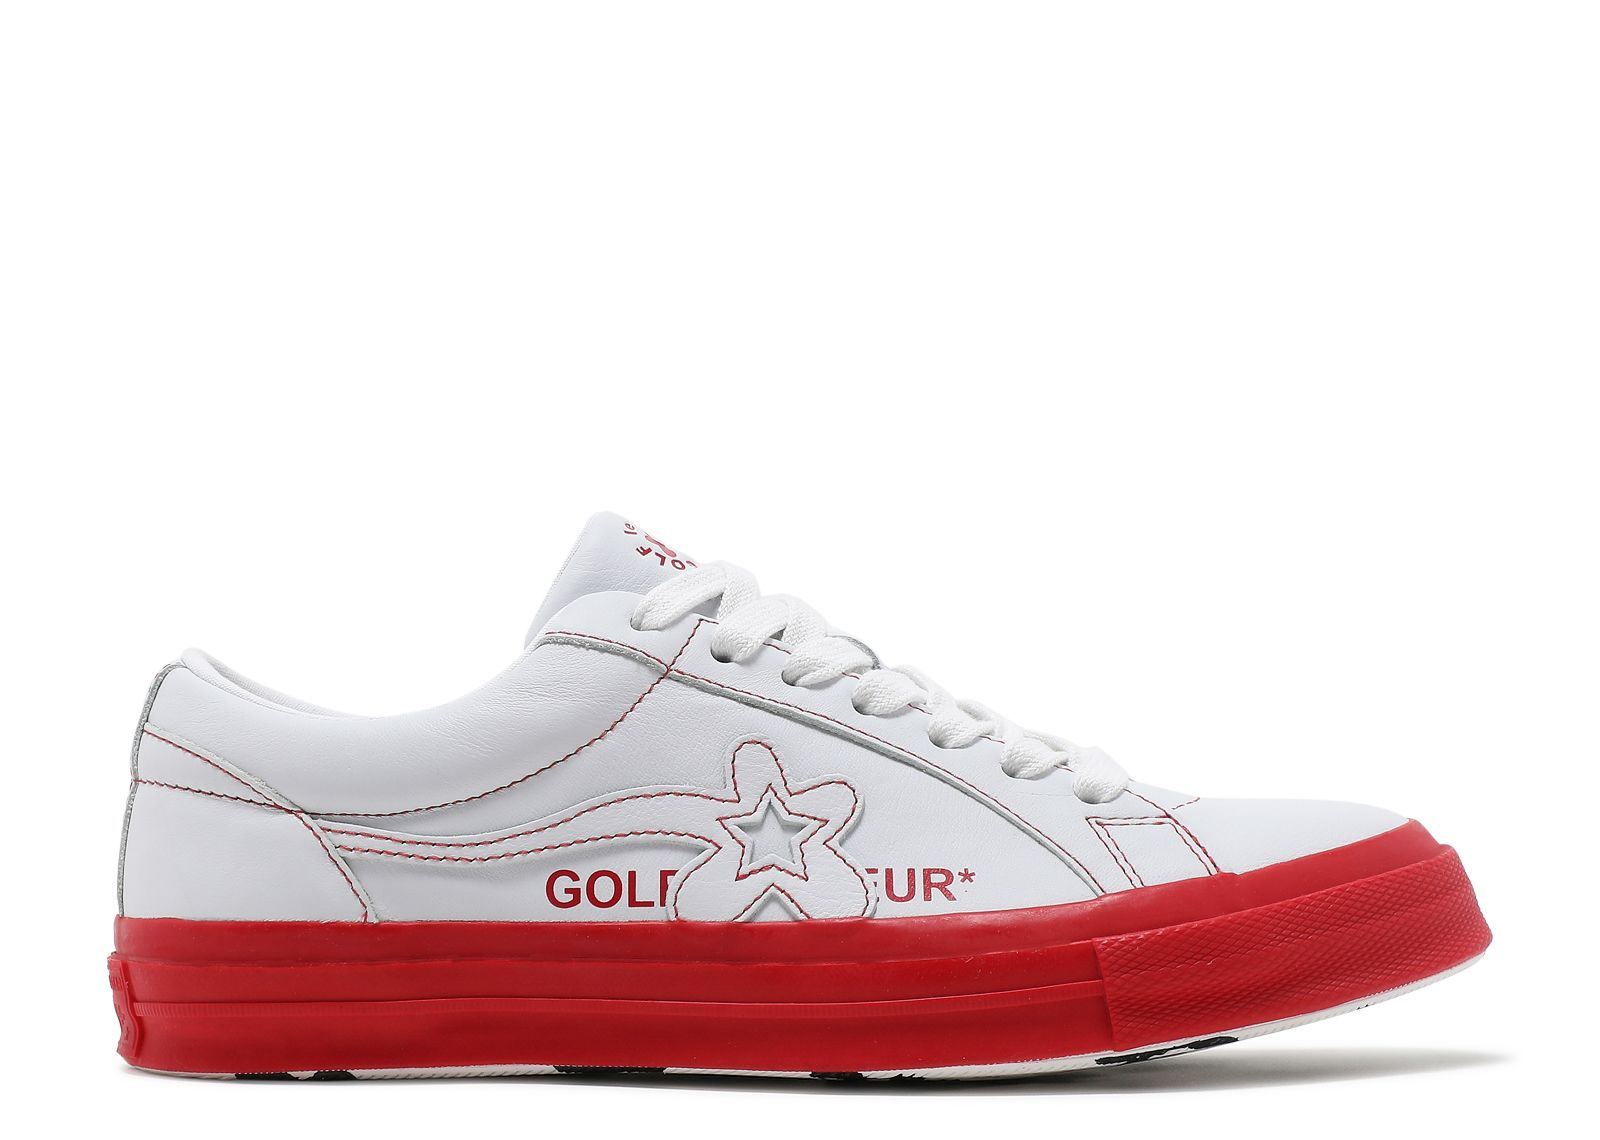 Кроссовки Converse Golf Le Fleur X One Star Ox 'Racing Red', красный golf wang funny soft silicone light pink air pods cover for airpod 2 cases earphone accessories airpods case tyler the creator